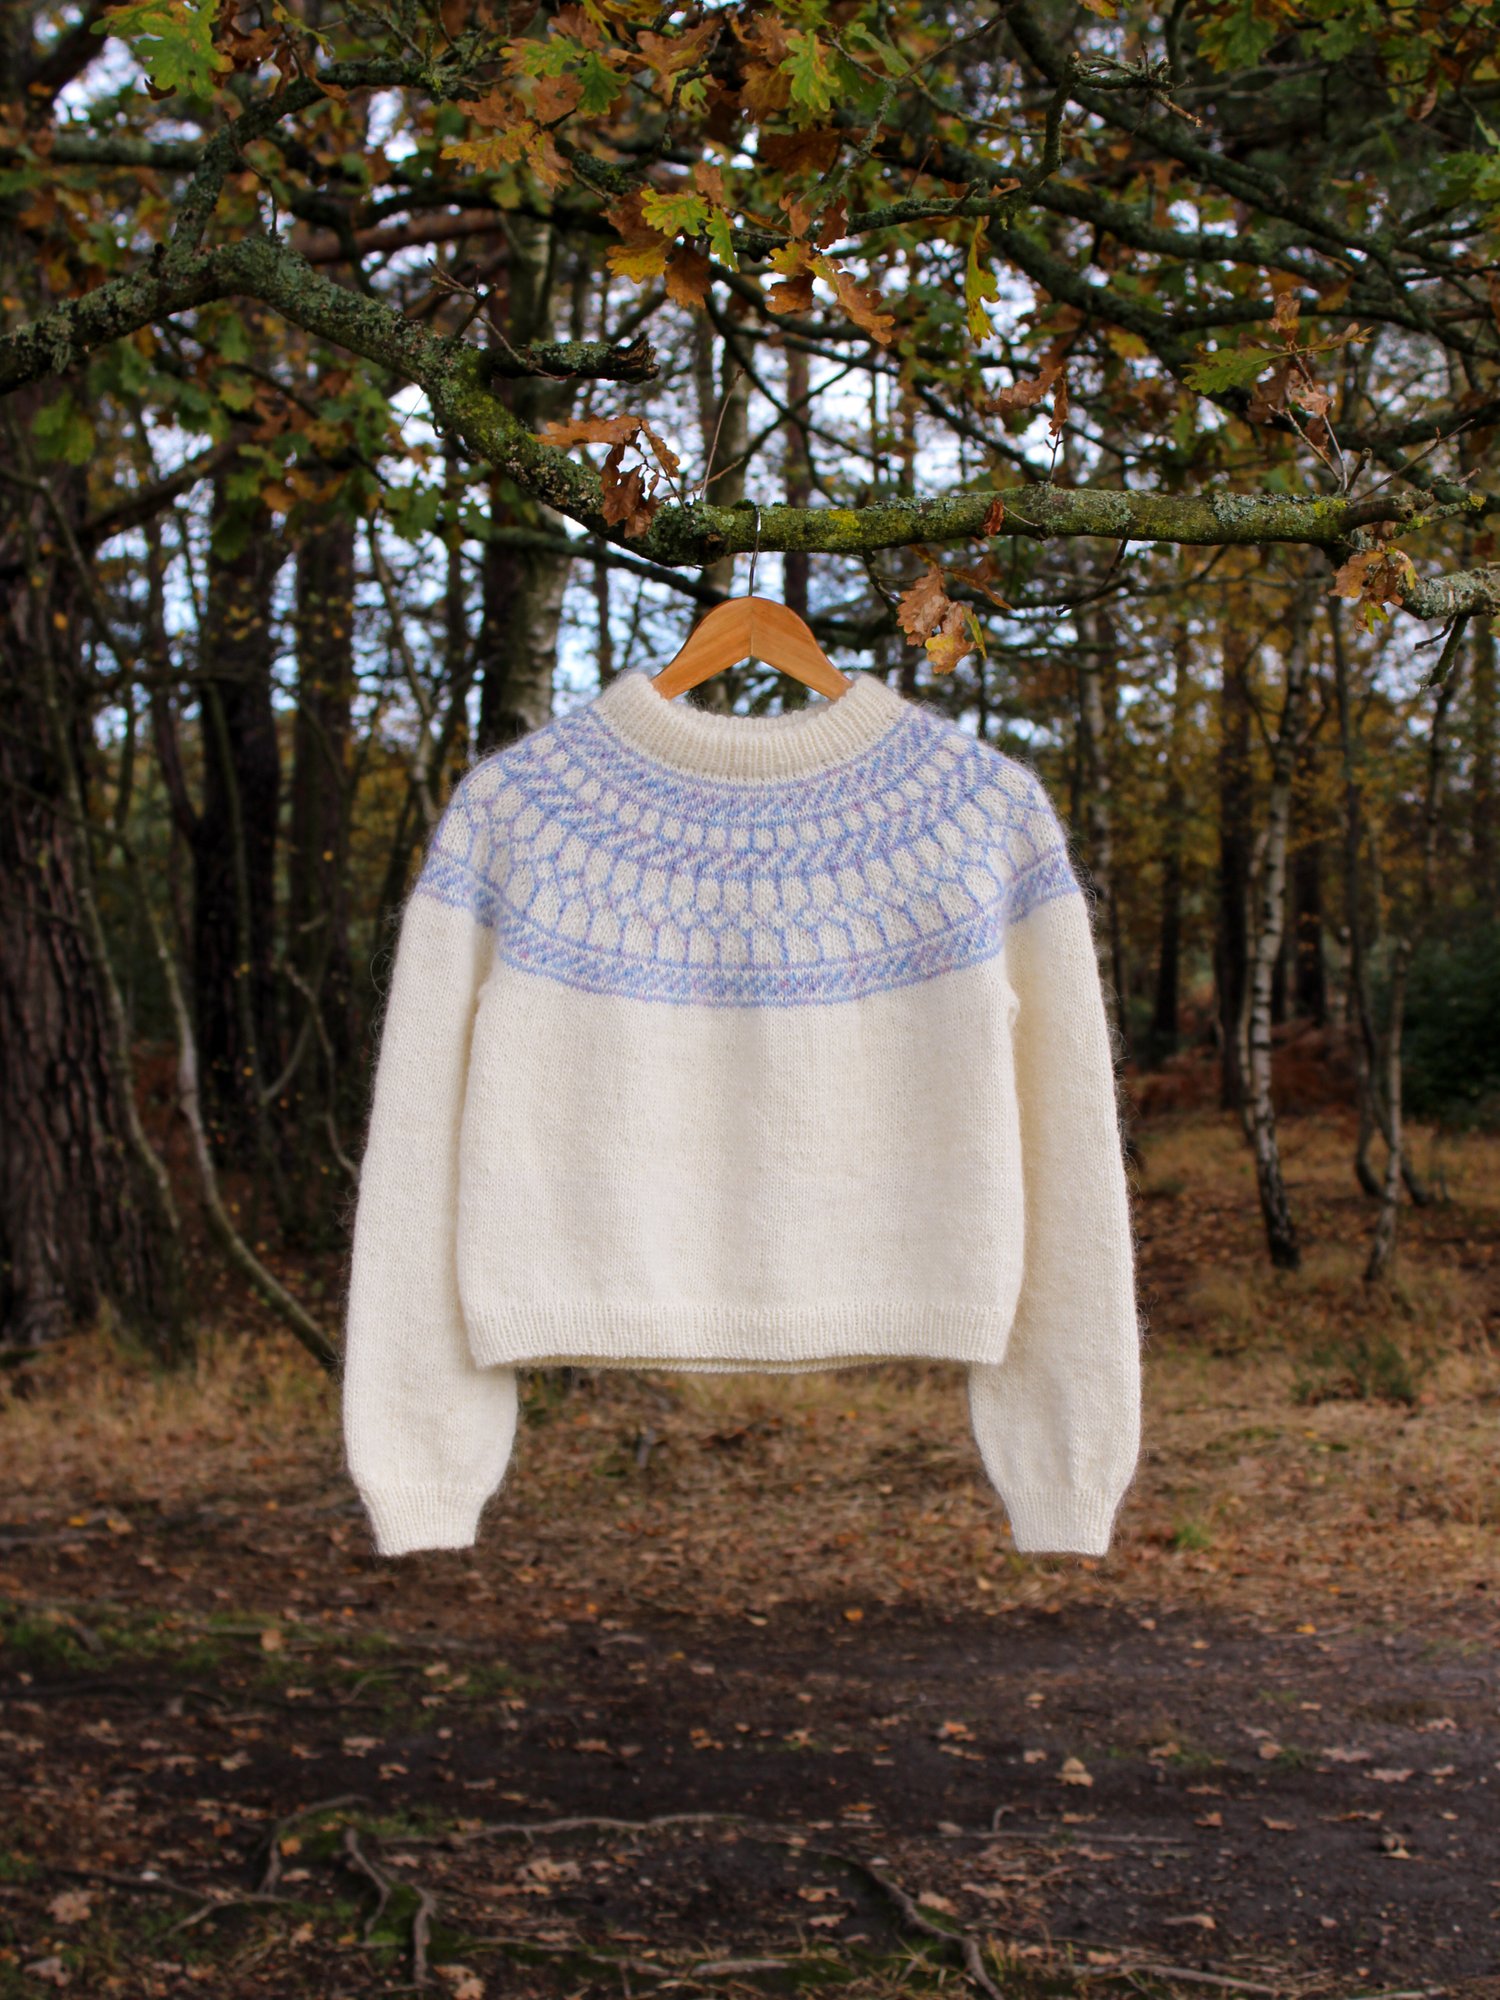 Haze Sweater — The Knit Purl Girl